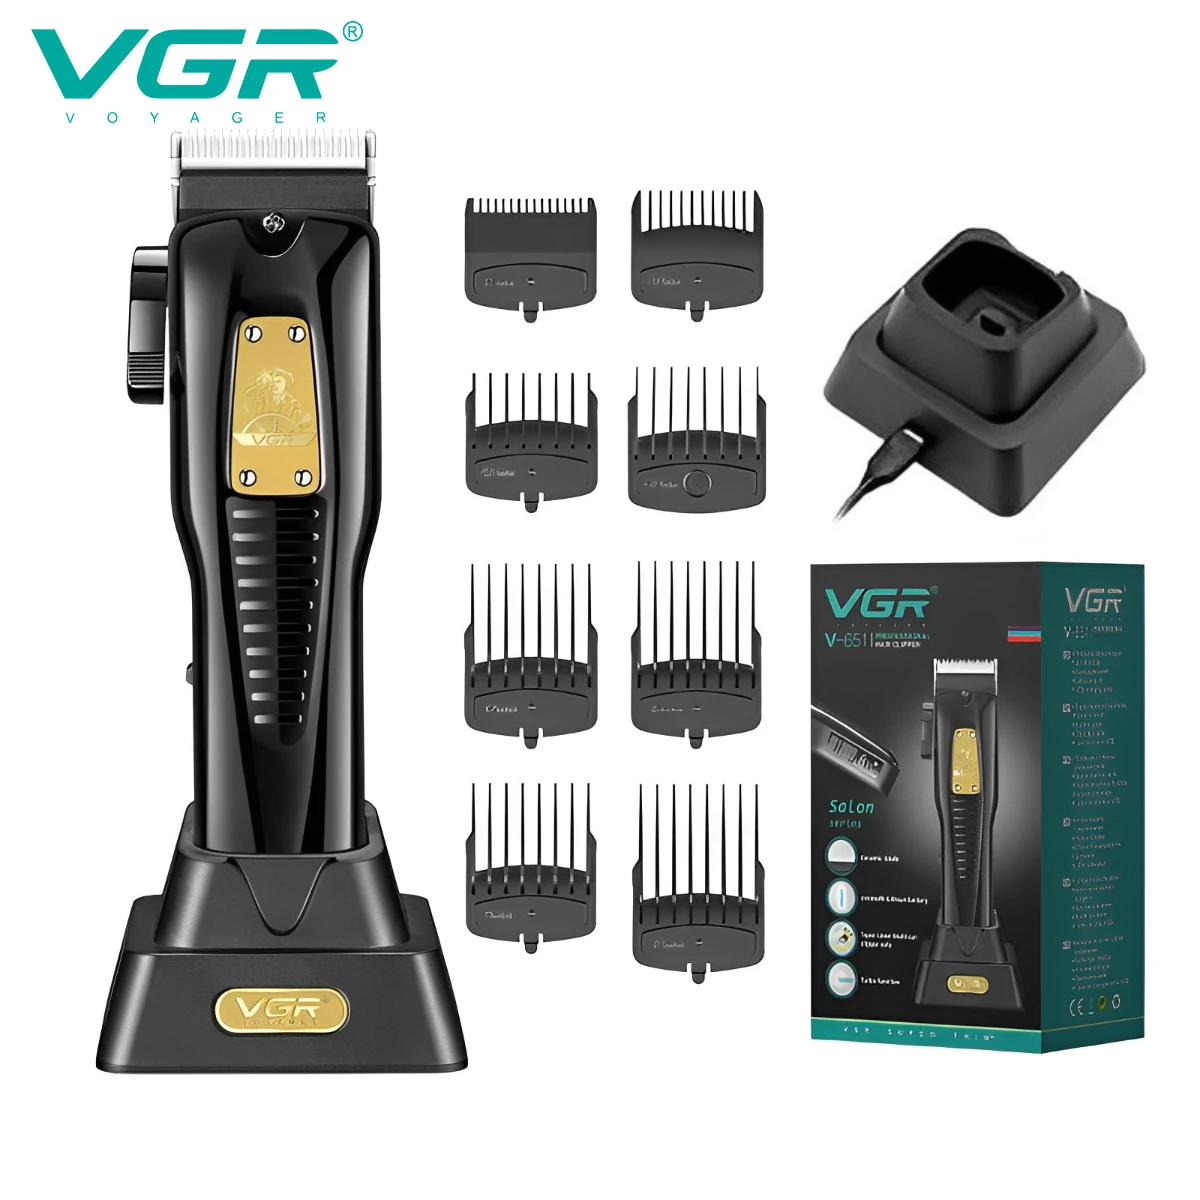 

VGR Hair Clipper Professional Hair Trimmer LED Display Hair Cutting Machine Multi-speed Barber Clippers with Charging Base V-651